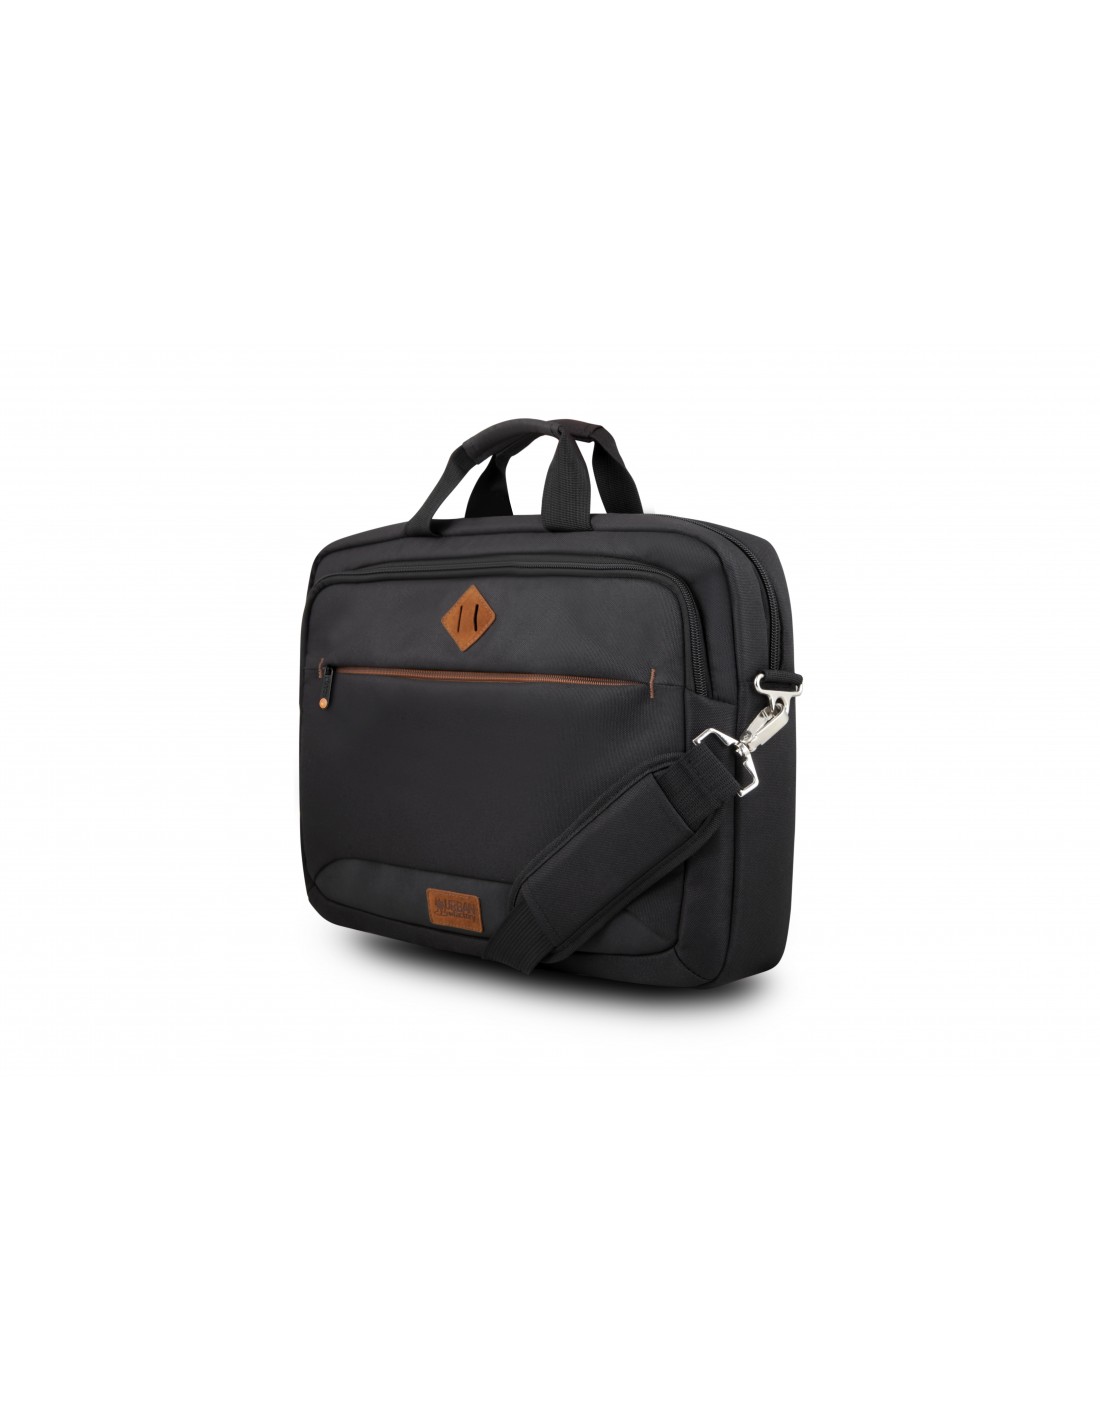 CYCLEE: ECO CASE FOR 13-14.1 COMPUTER